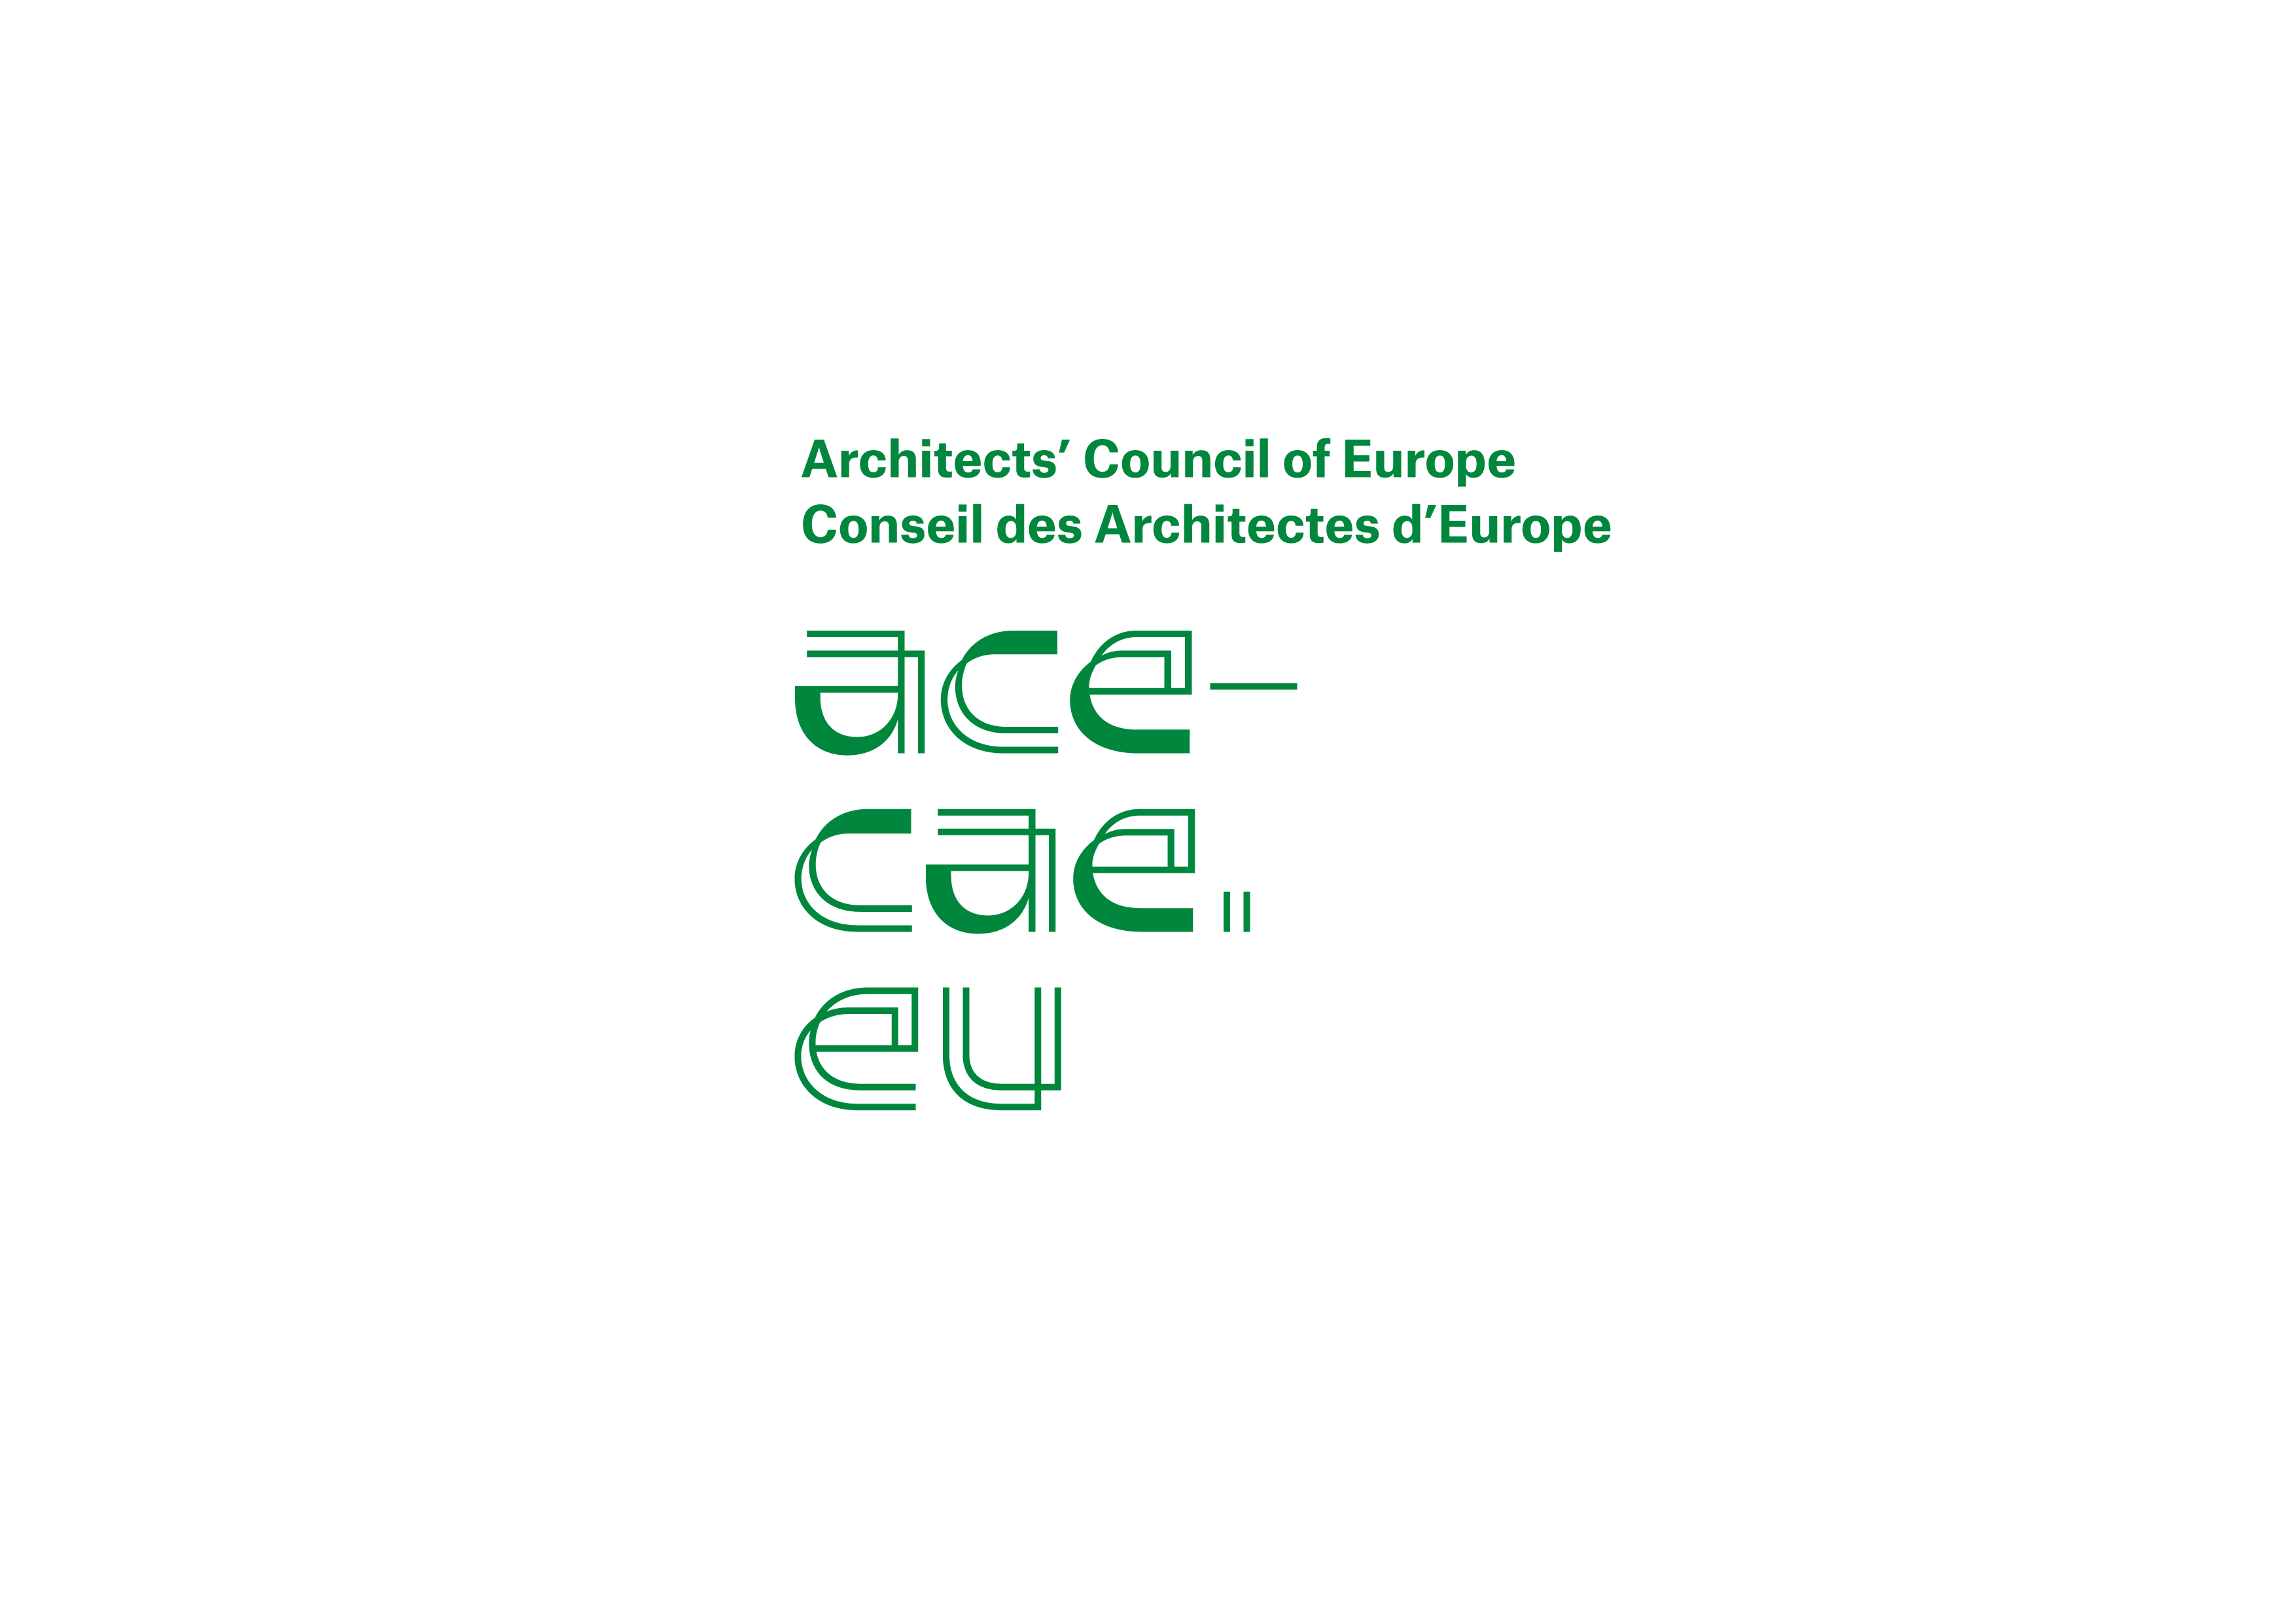 Architects' Council of Europe (ACE) Image